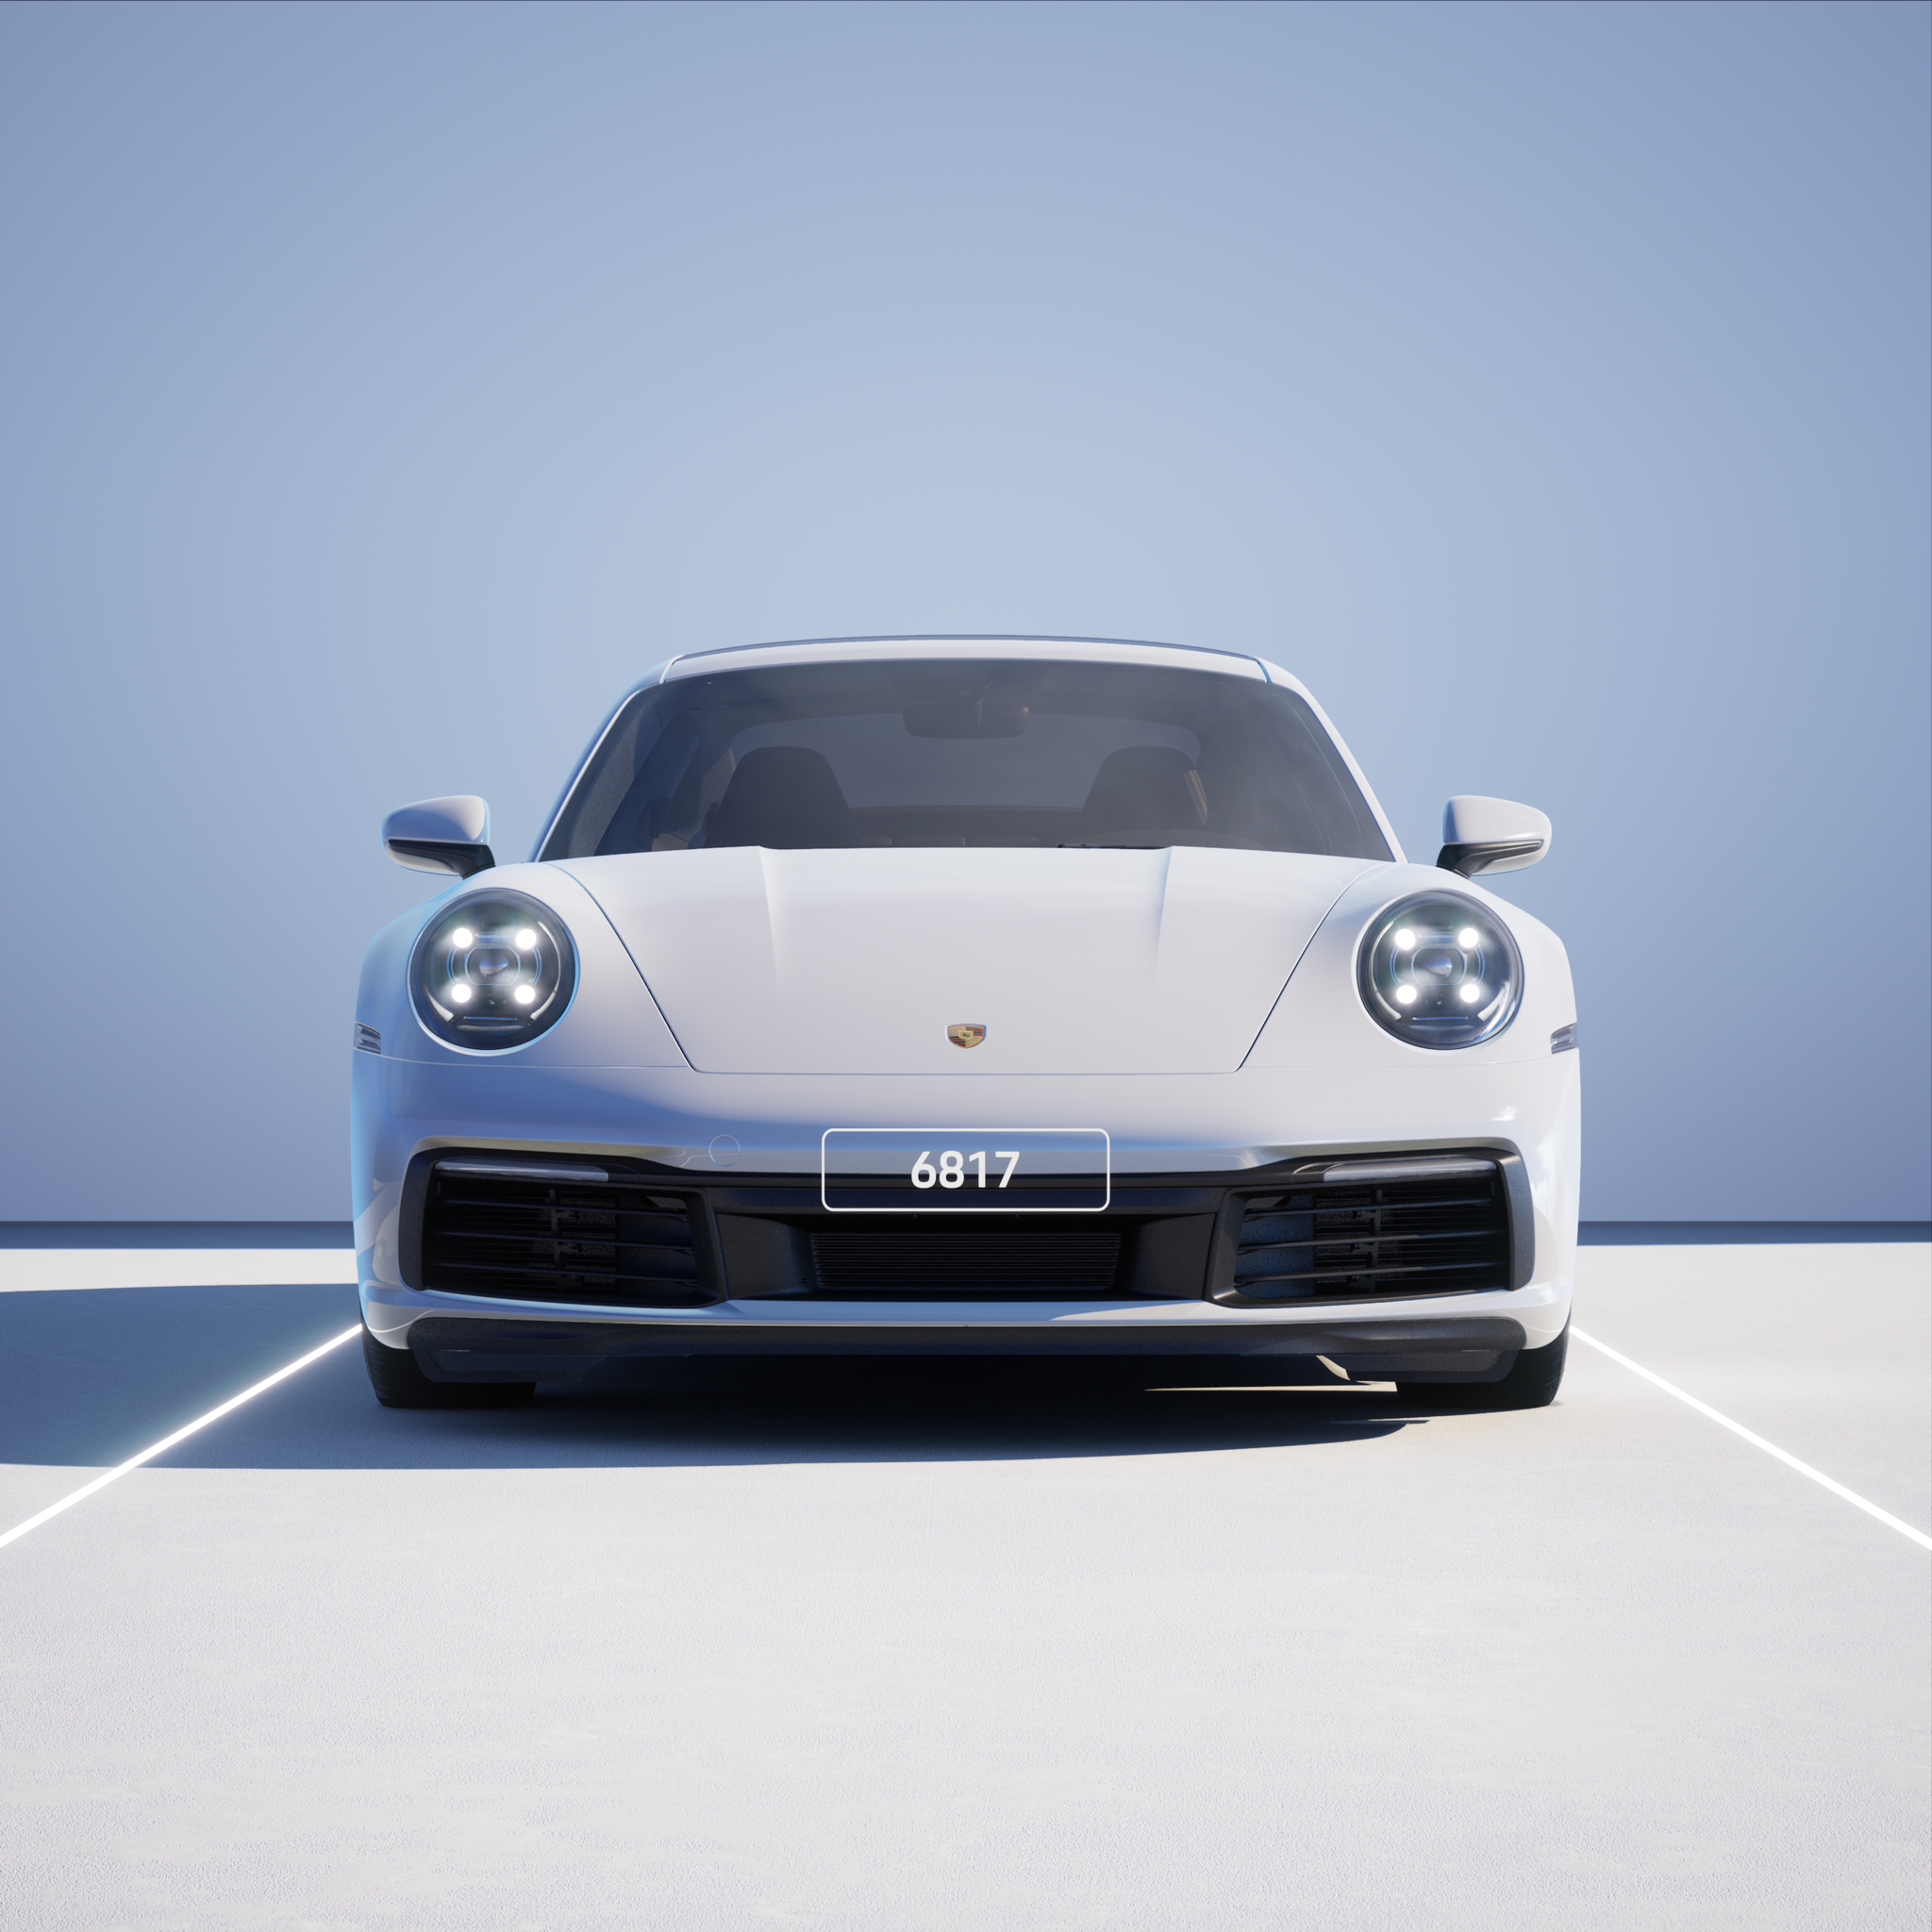 The PORSCHΞ 911 6817 image in phase